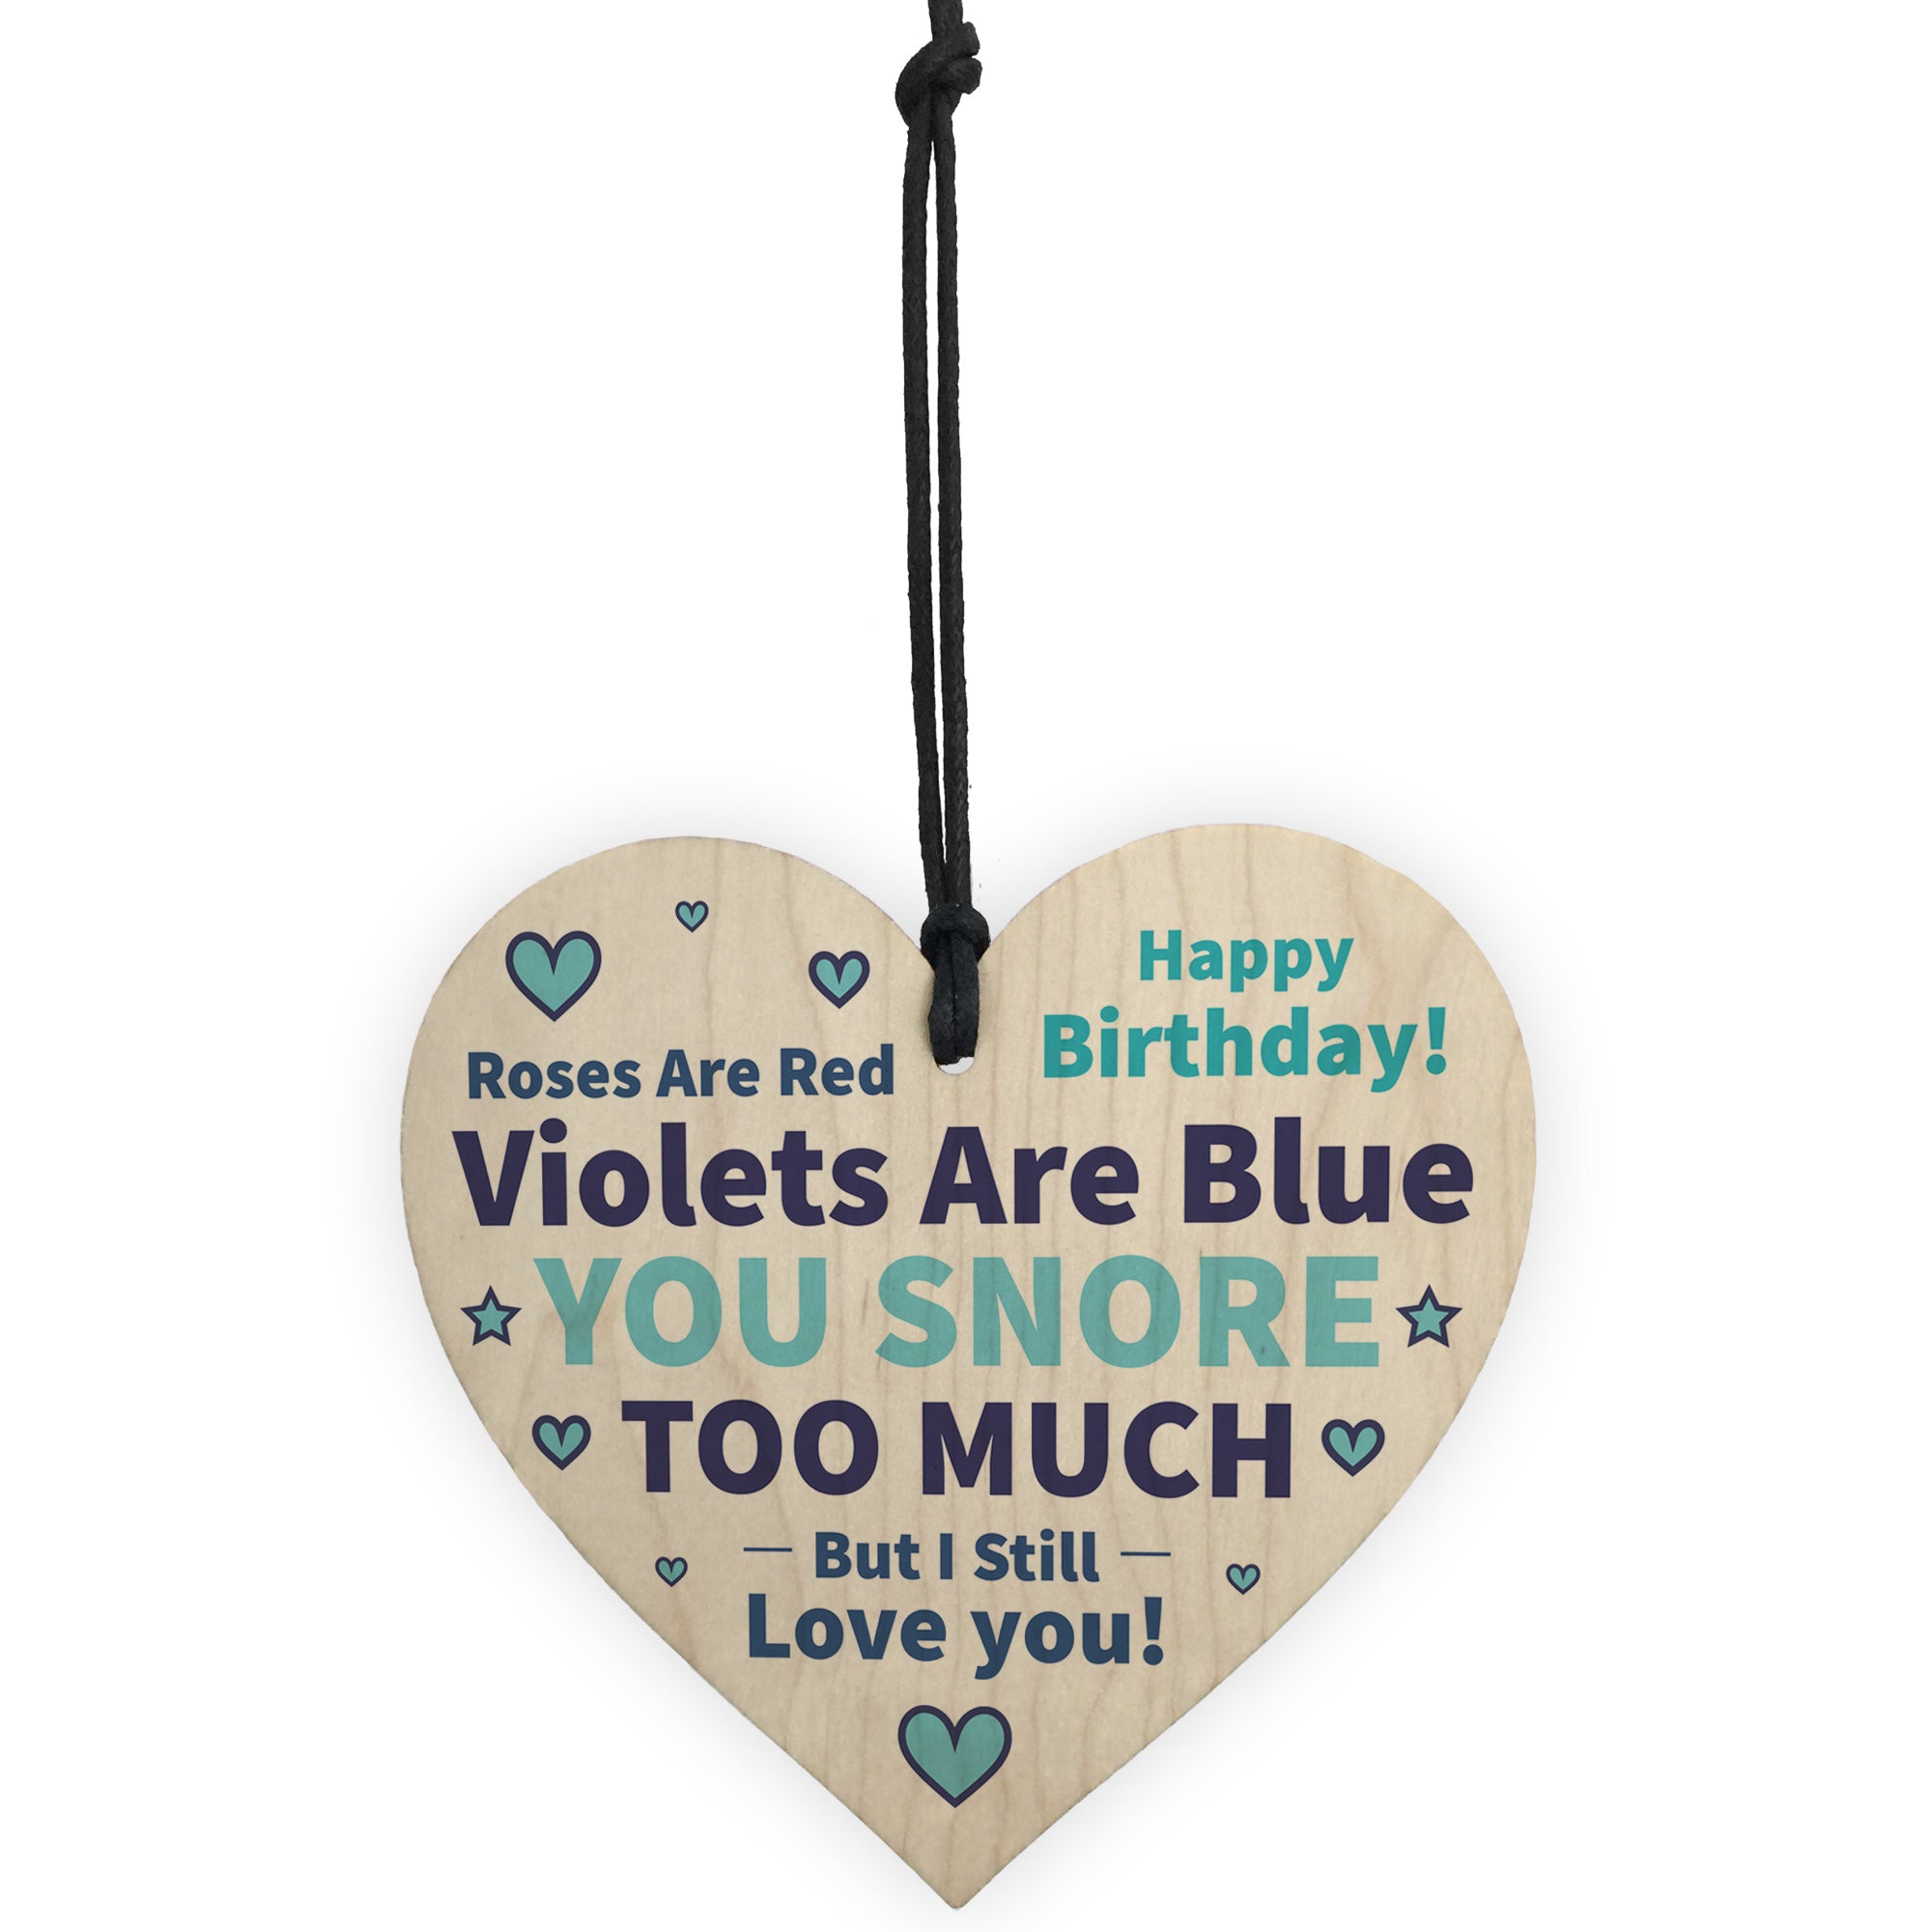 Amazon.com : TGCNQ Wife Birthday Card Girlfriend Birthday Gifts - Happy  Birthday to My Love, Engraved Wallet Card : Office Products